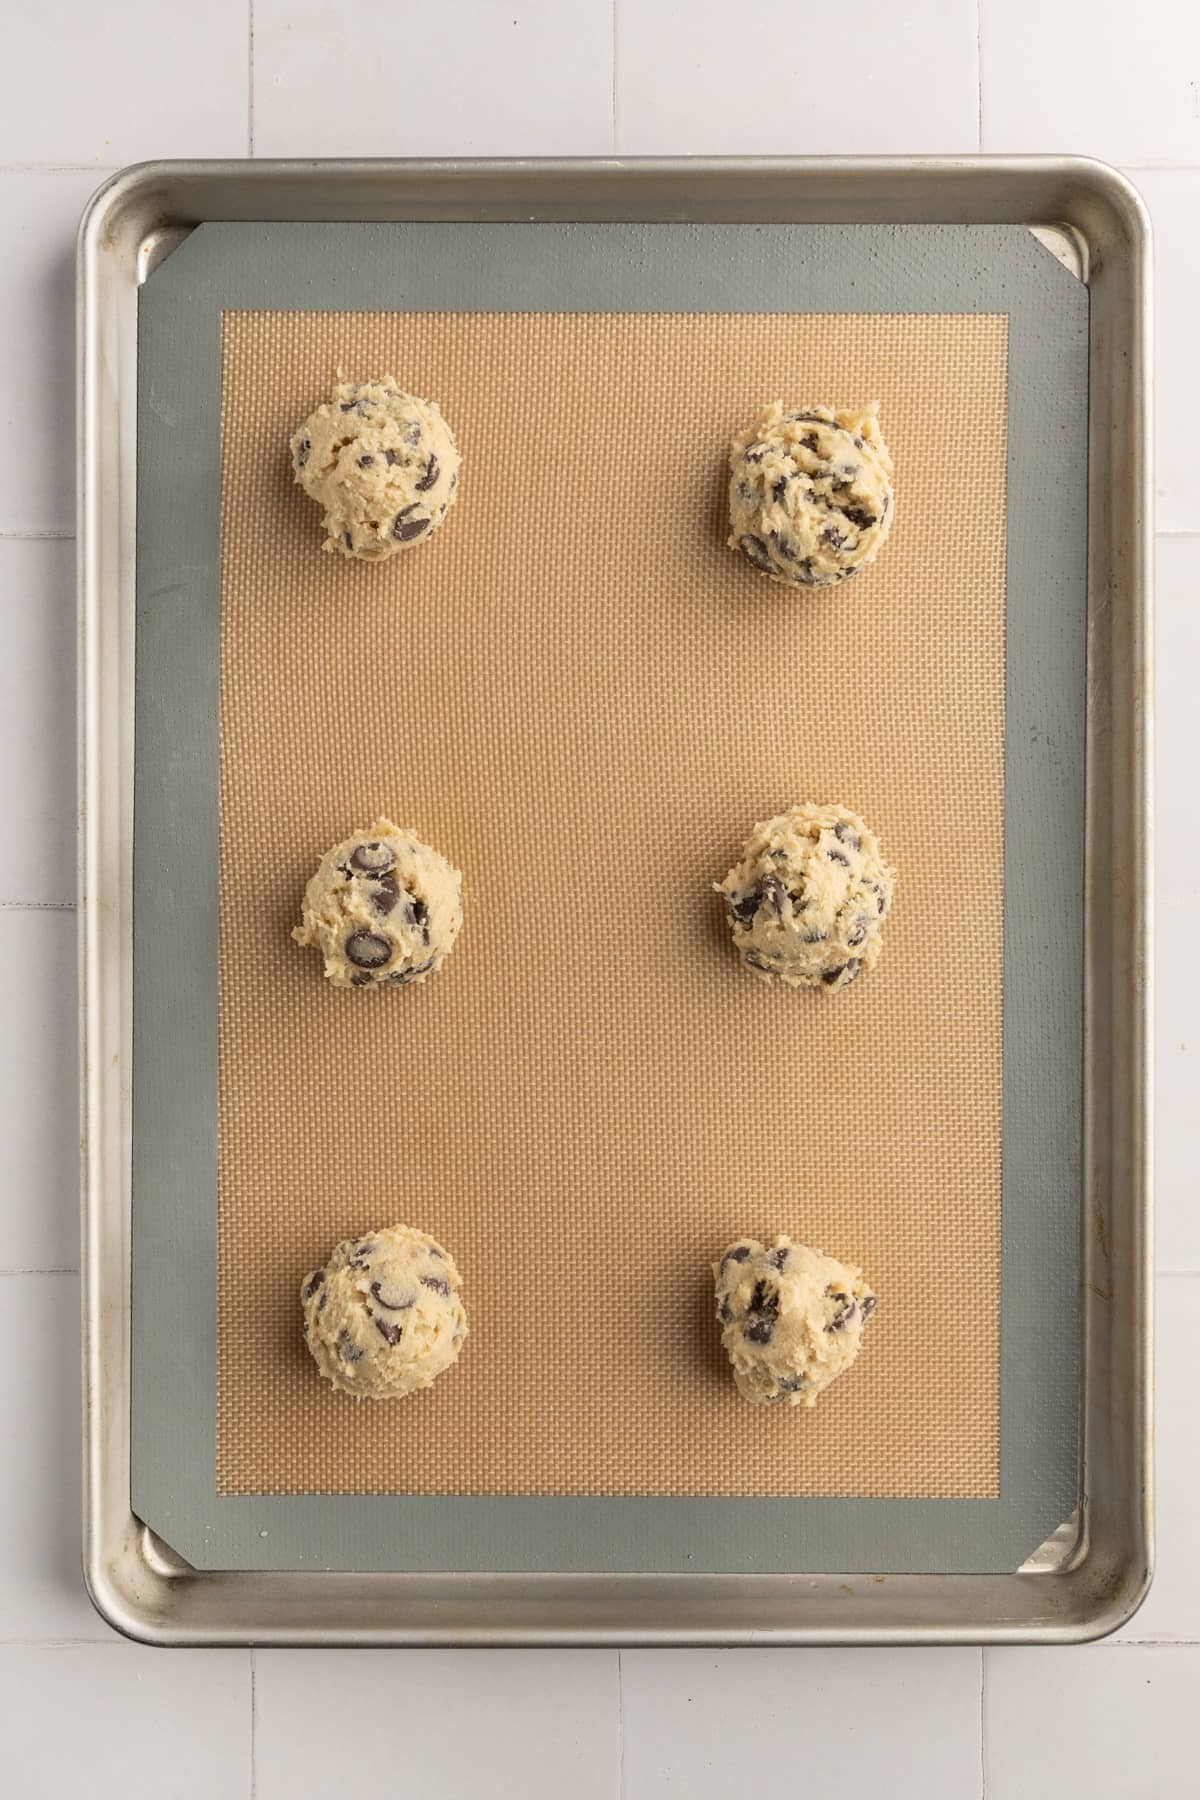 No-Egg chocolate chip cookie dough ready to be baked